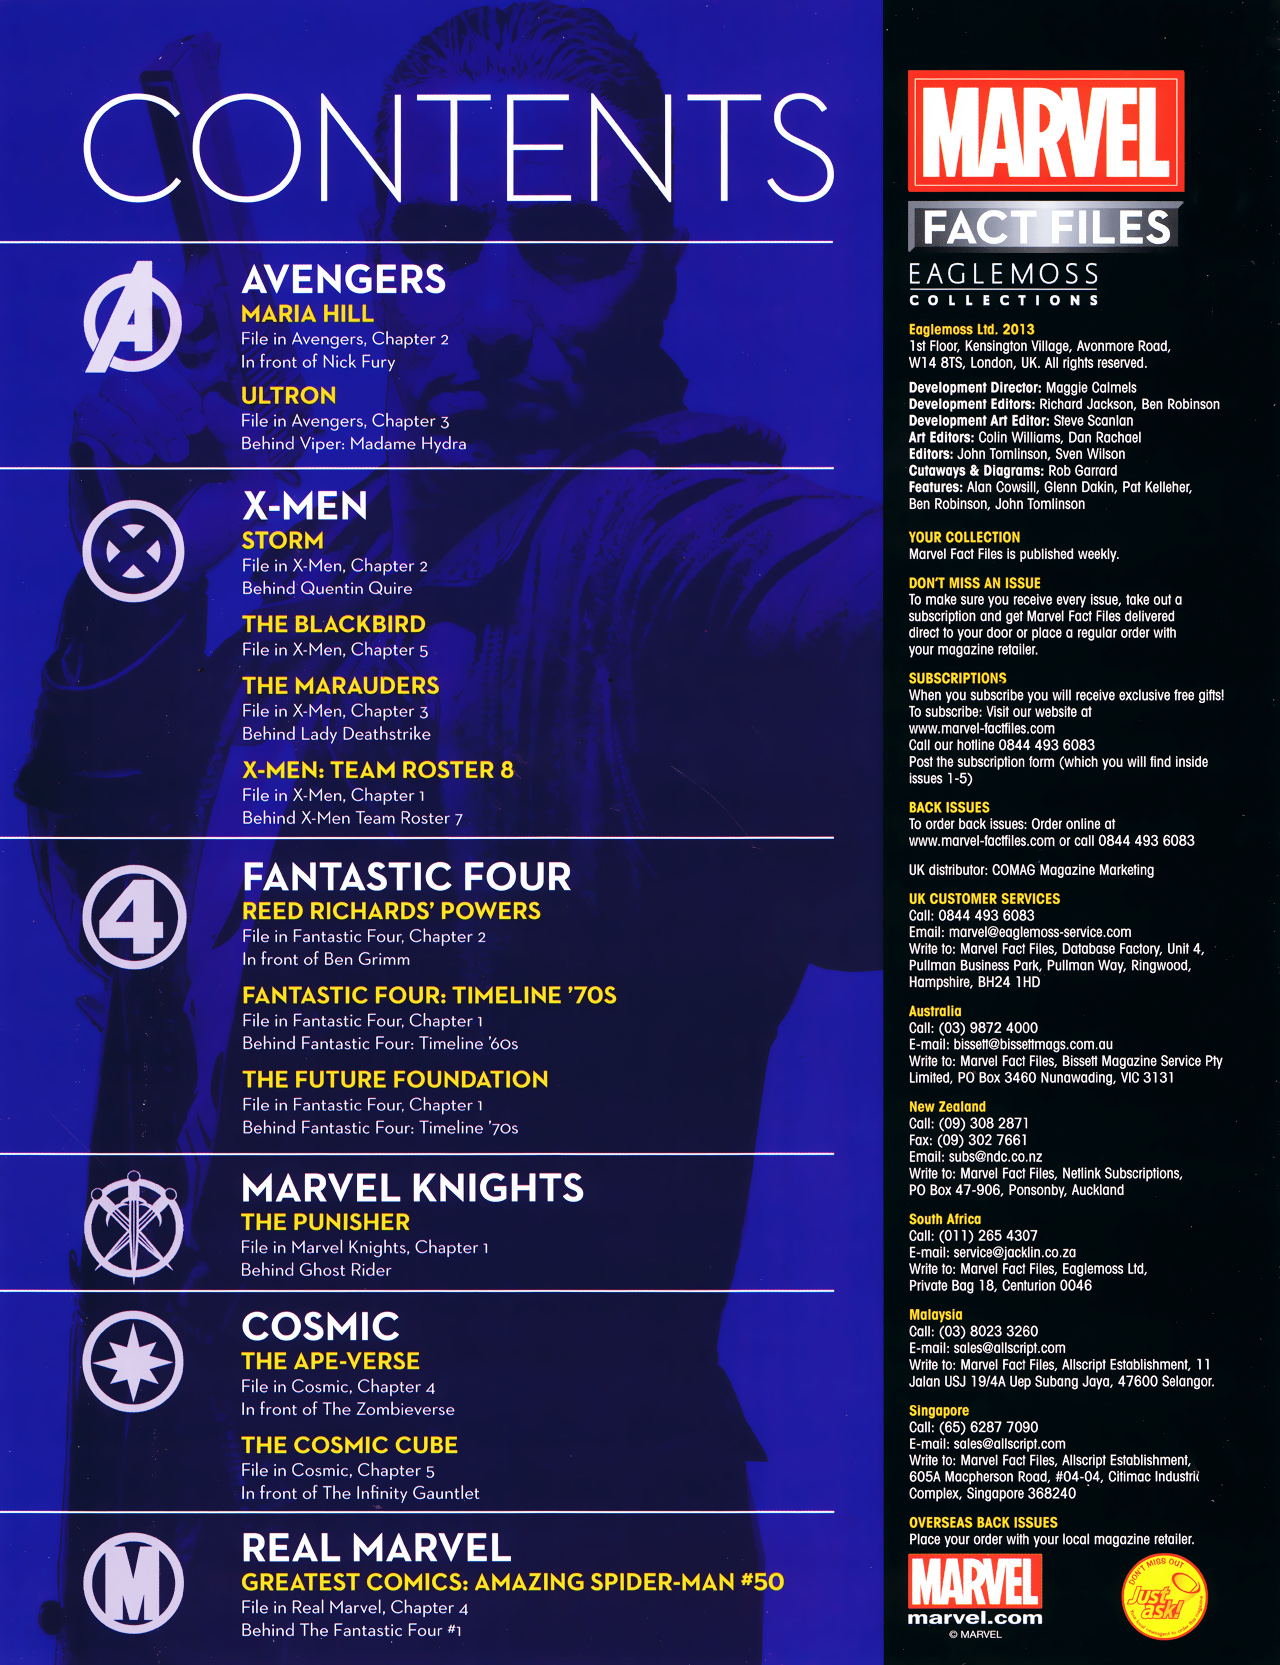 Read online Marvel Fact Files comic -  Issue #7 - 2